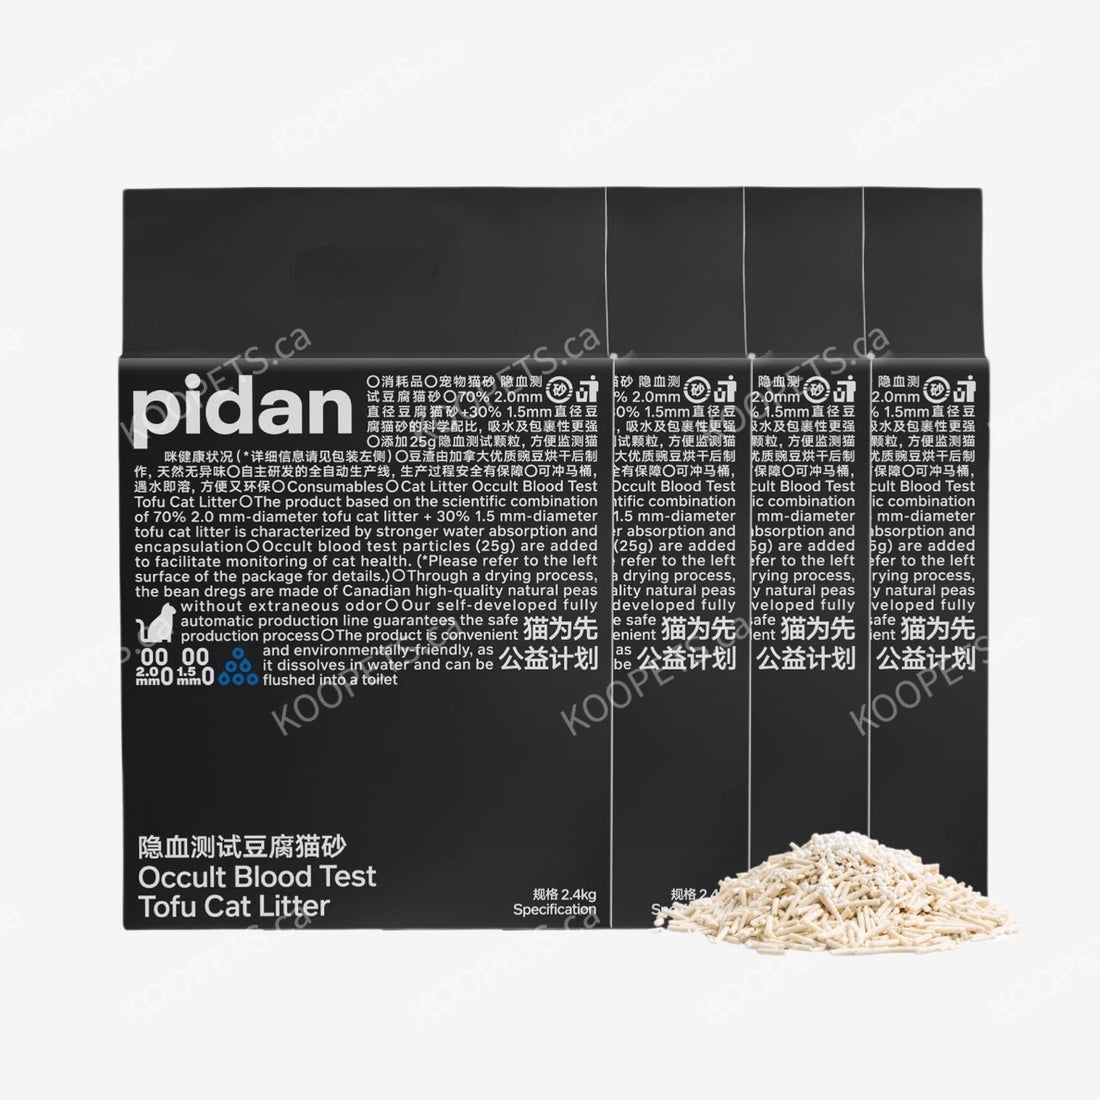 Pidan | Tofu Cat Litter with the Occult Blood Test Particles